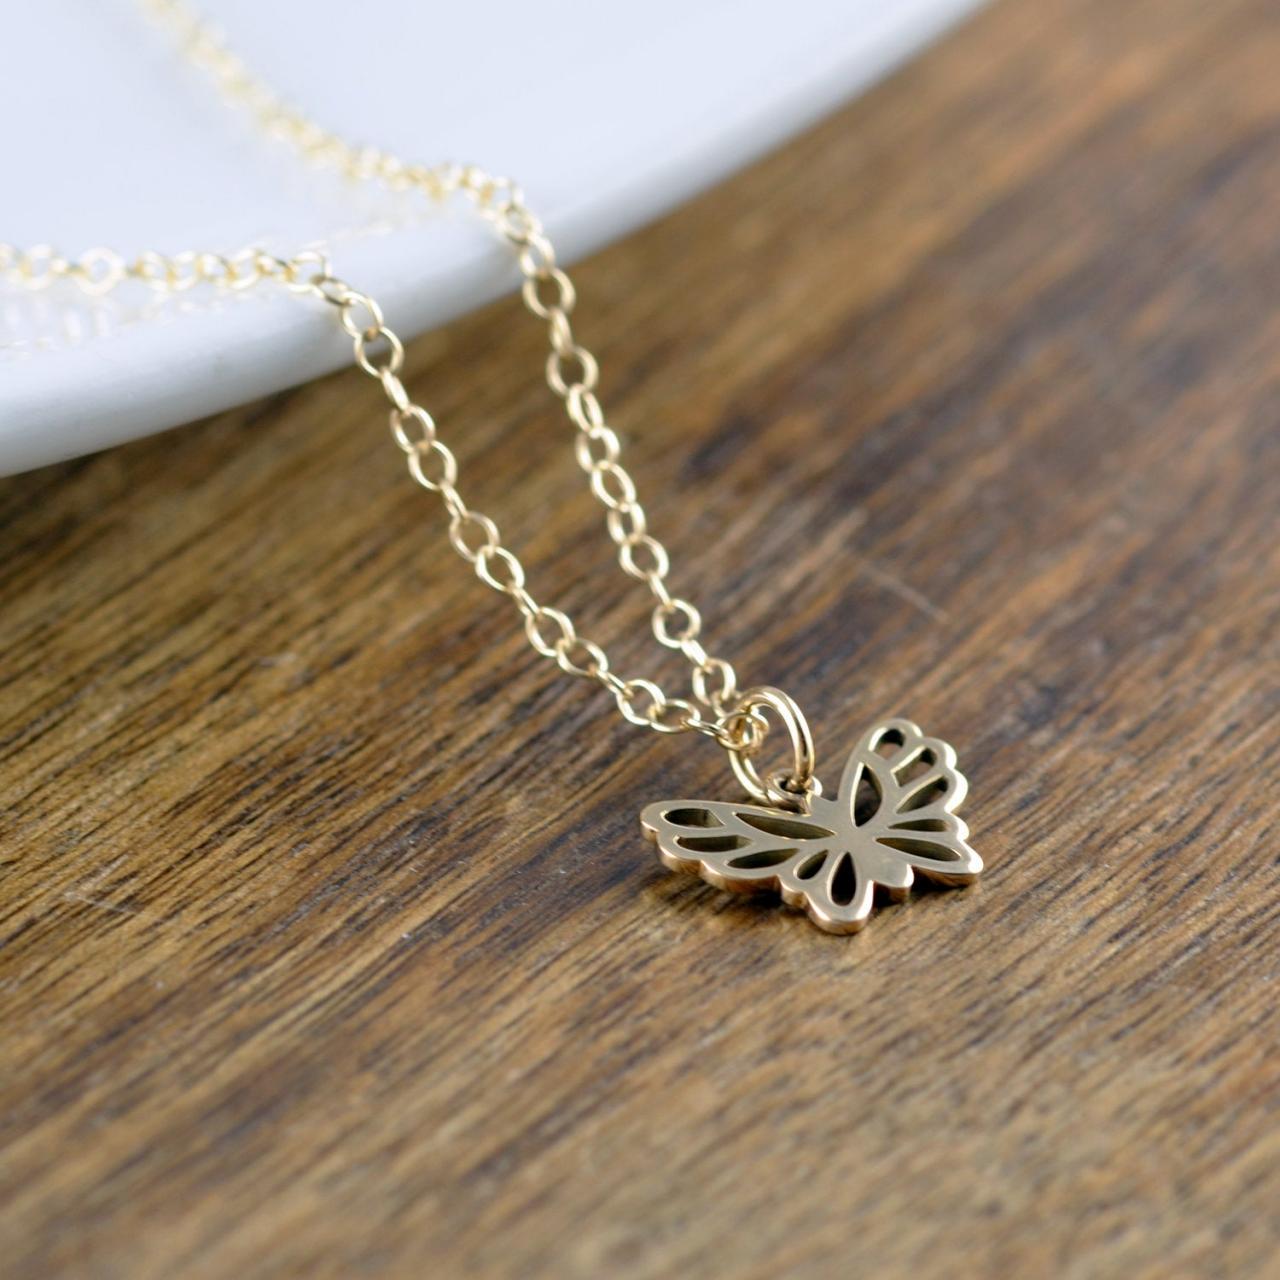 Gold Butterfly Necklace, Butterfly Necklace, Butterfly Charm Necklace, Butterfly Jewelry, Mother, Best Friends Gift, Wife Gift, Sister Gift